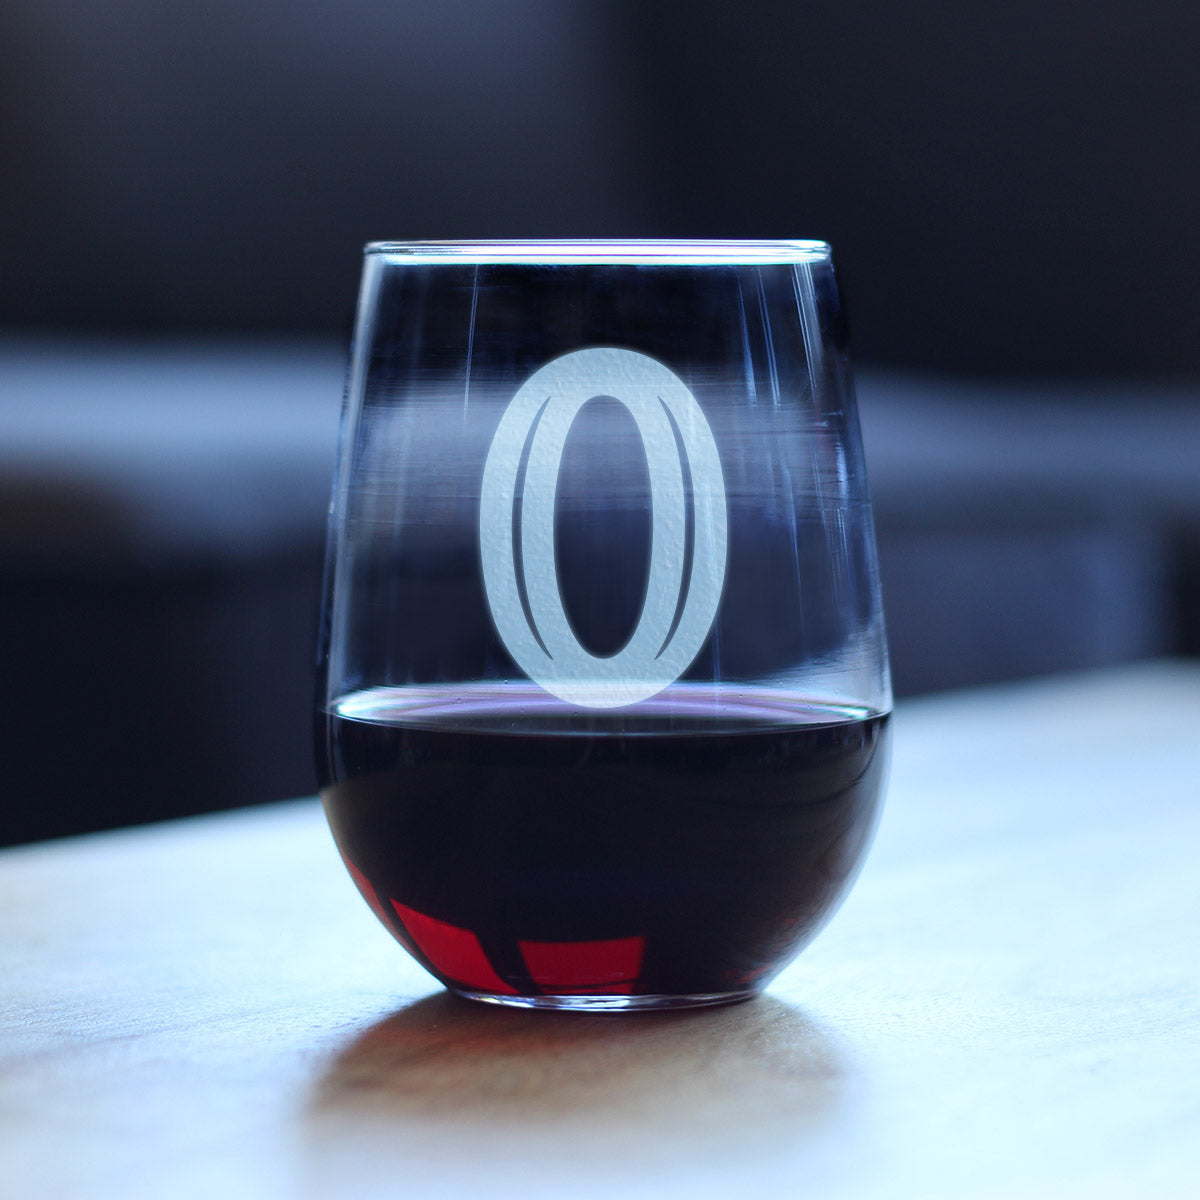 Monogram Bold Letter O - Stemless Wine Glass - Personalized Gifts for Women and Men - Large Engraved Glasses